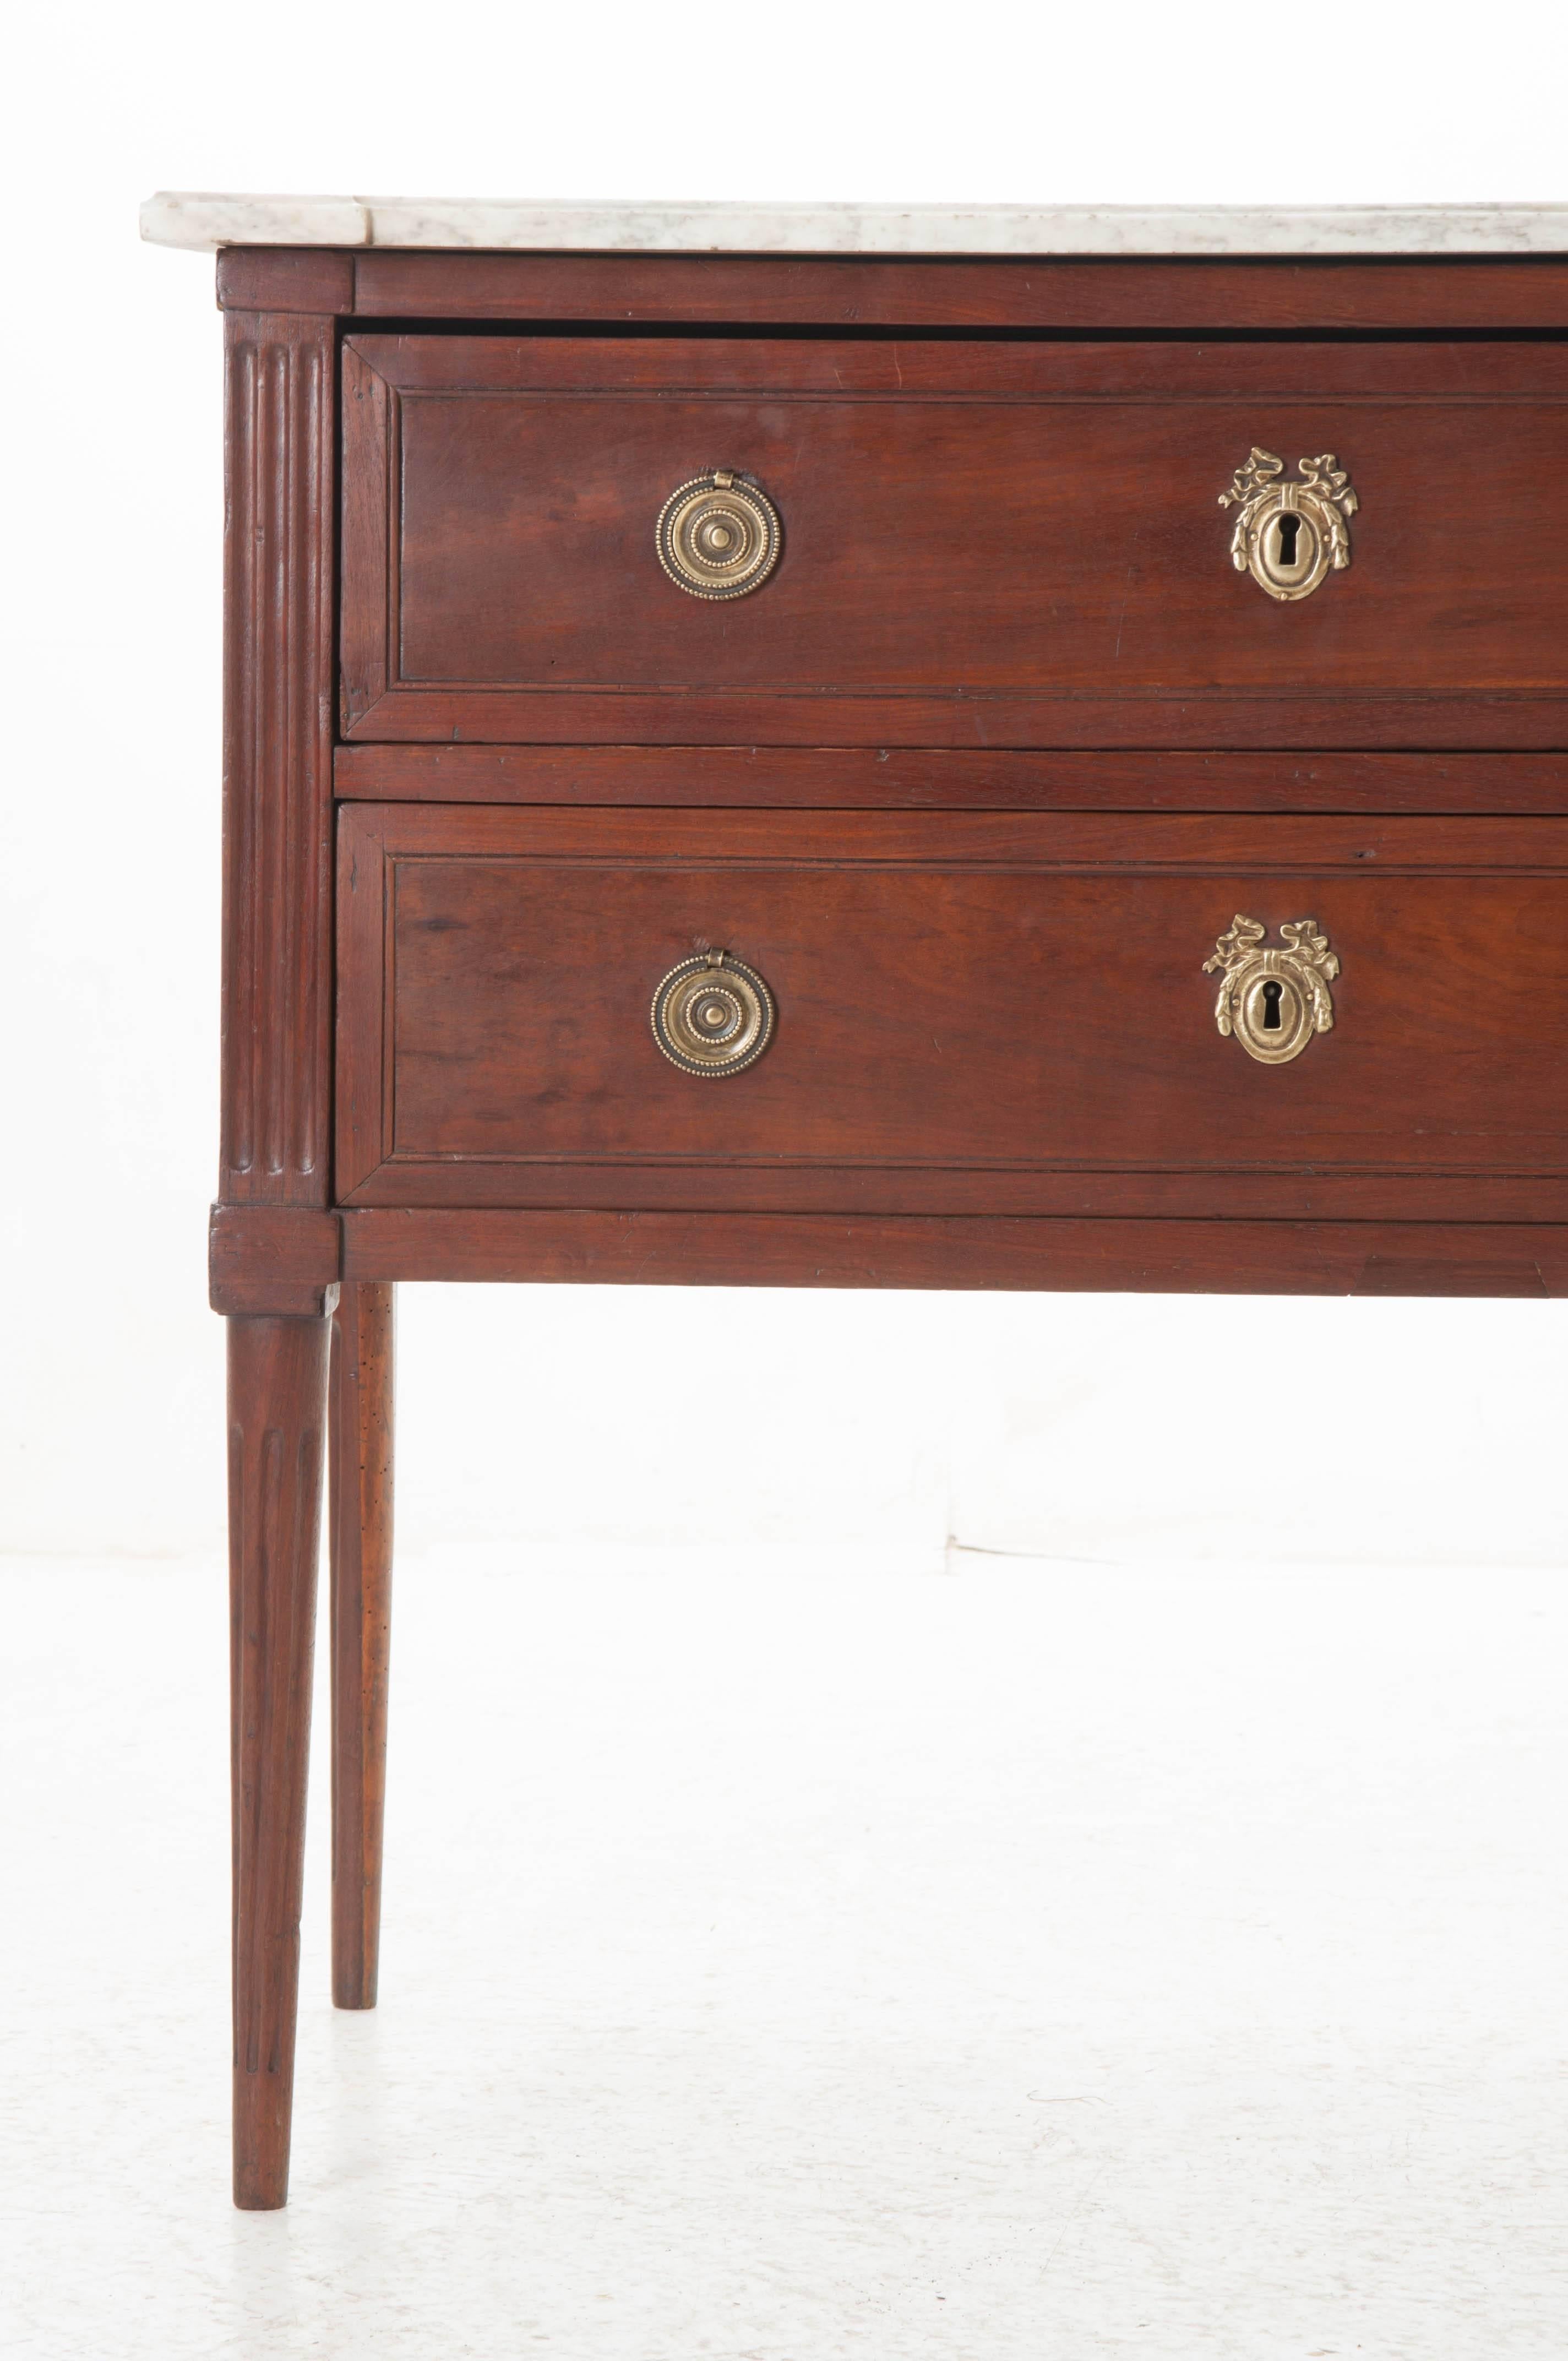 Louis XVI style mahogany two-drawer commode. Original shaped marble top is in antique condition with minimal discoloration. The pilaster corners are fluted and the whole piece is supported by tall tapered legs. The drawers are equipped with